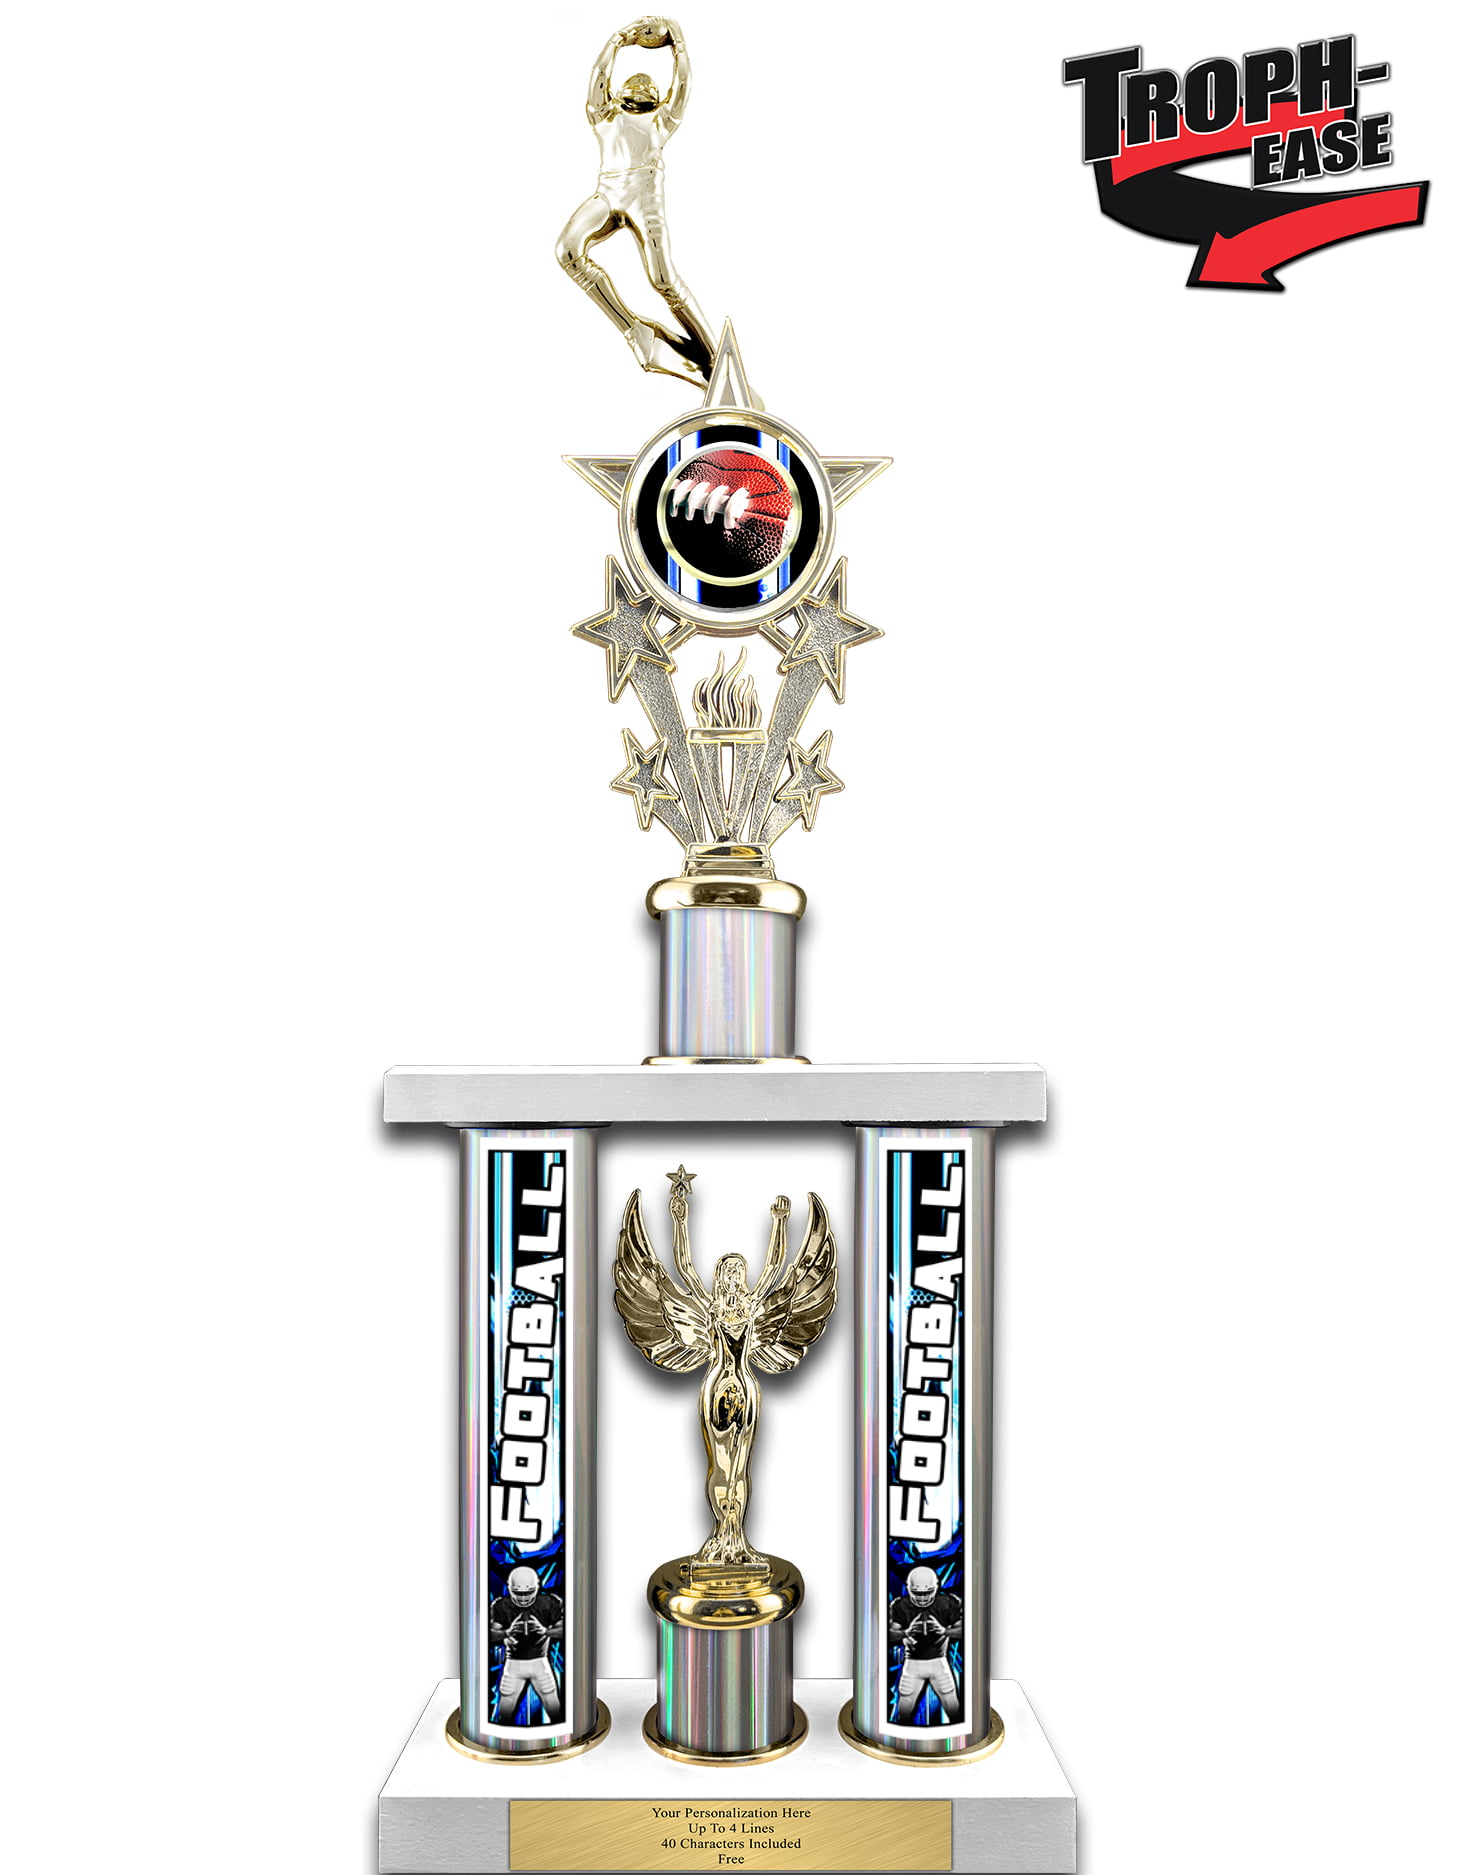 Football Trophies Silver and Red Champions Football Cup 3 sizes FREE Engraving 